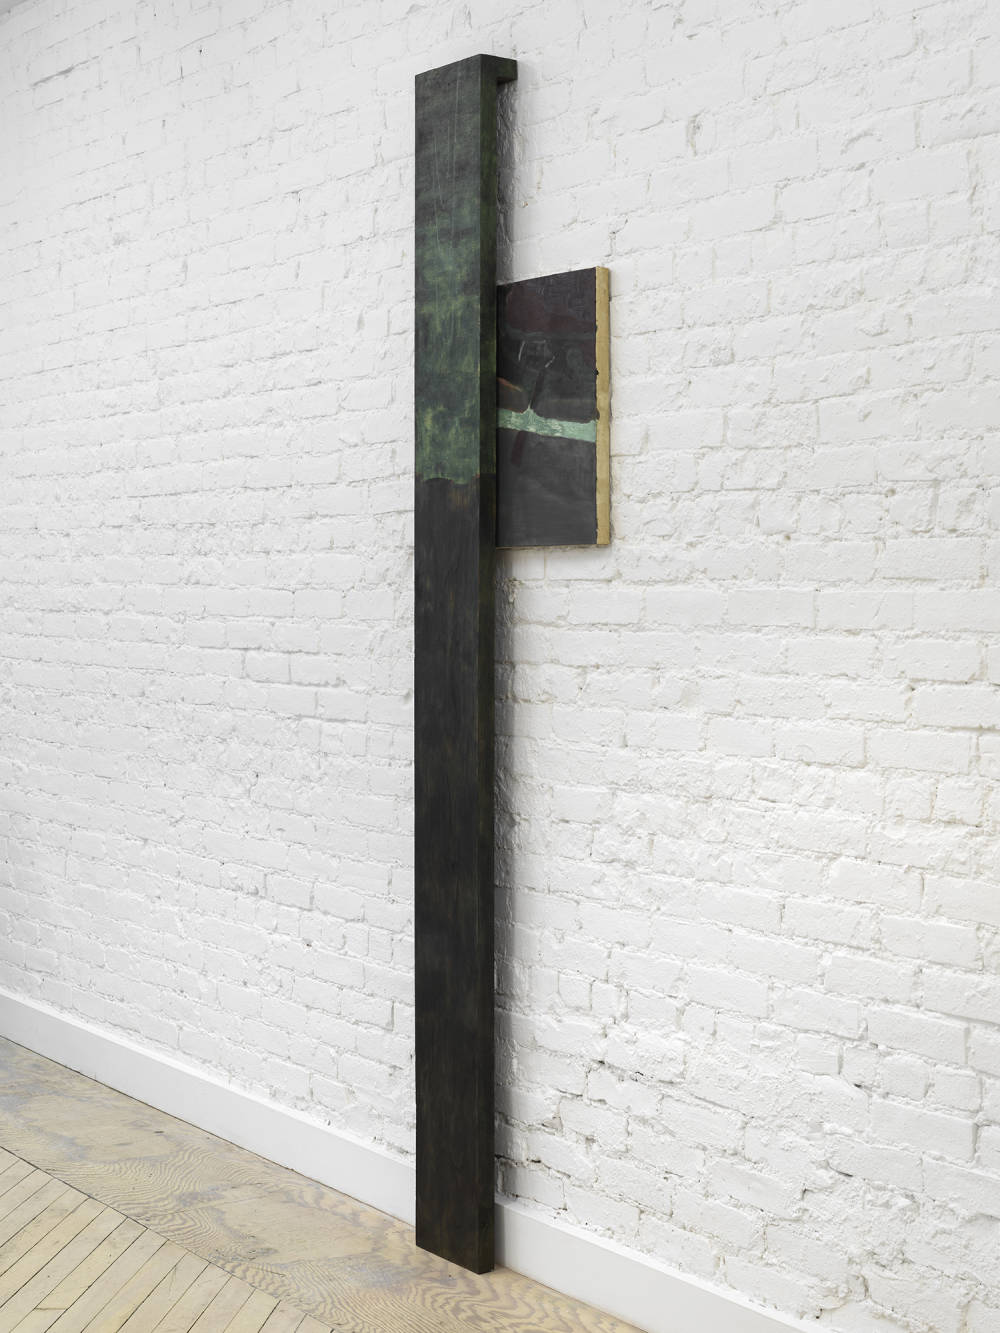 A vertical sculpture and painting rendered in a dark black and green palette installed against a brick gallery wall. 